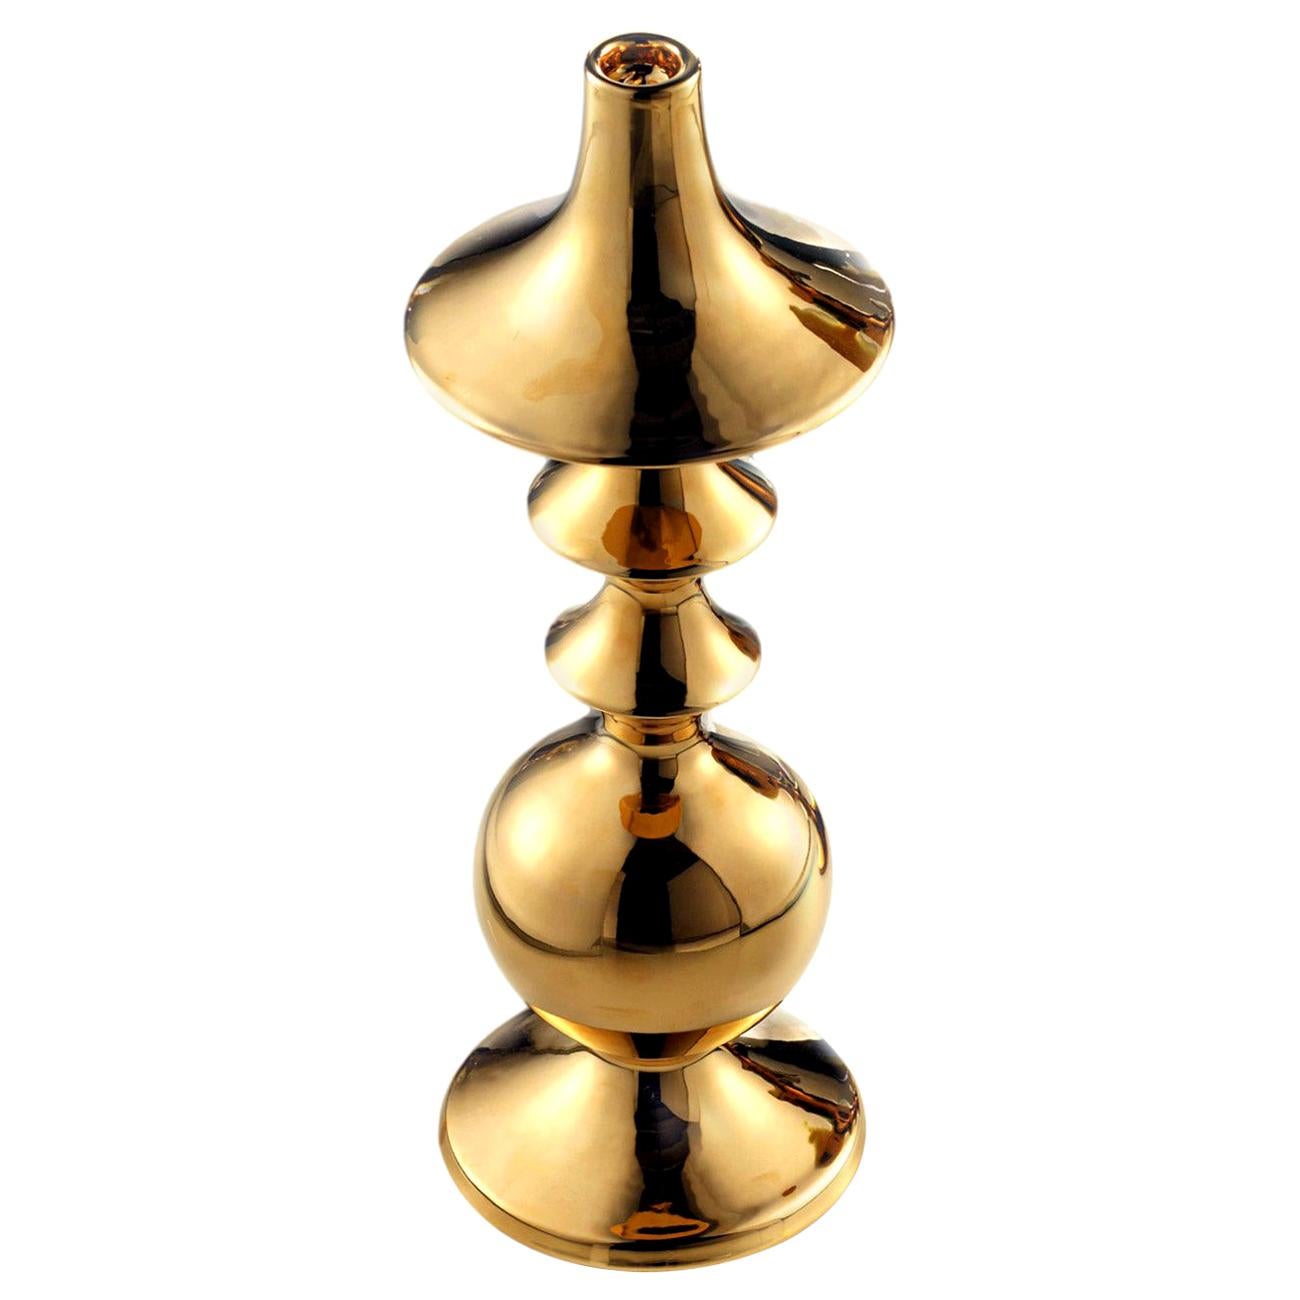 Ceramic Vase "BRIX" Handcrafted in 24-Karat Gold by Gabriella B. Made in Italy For Sale